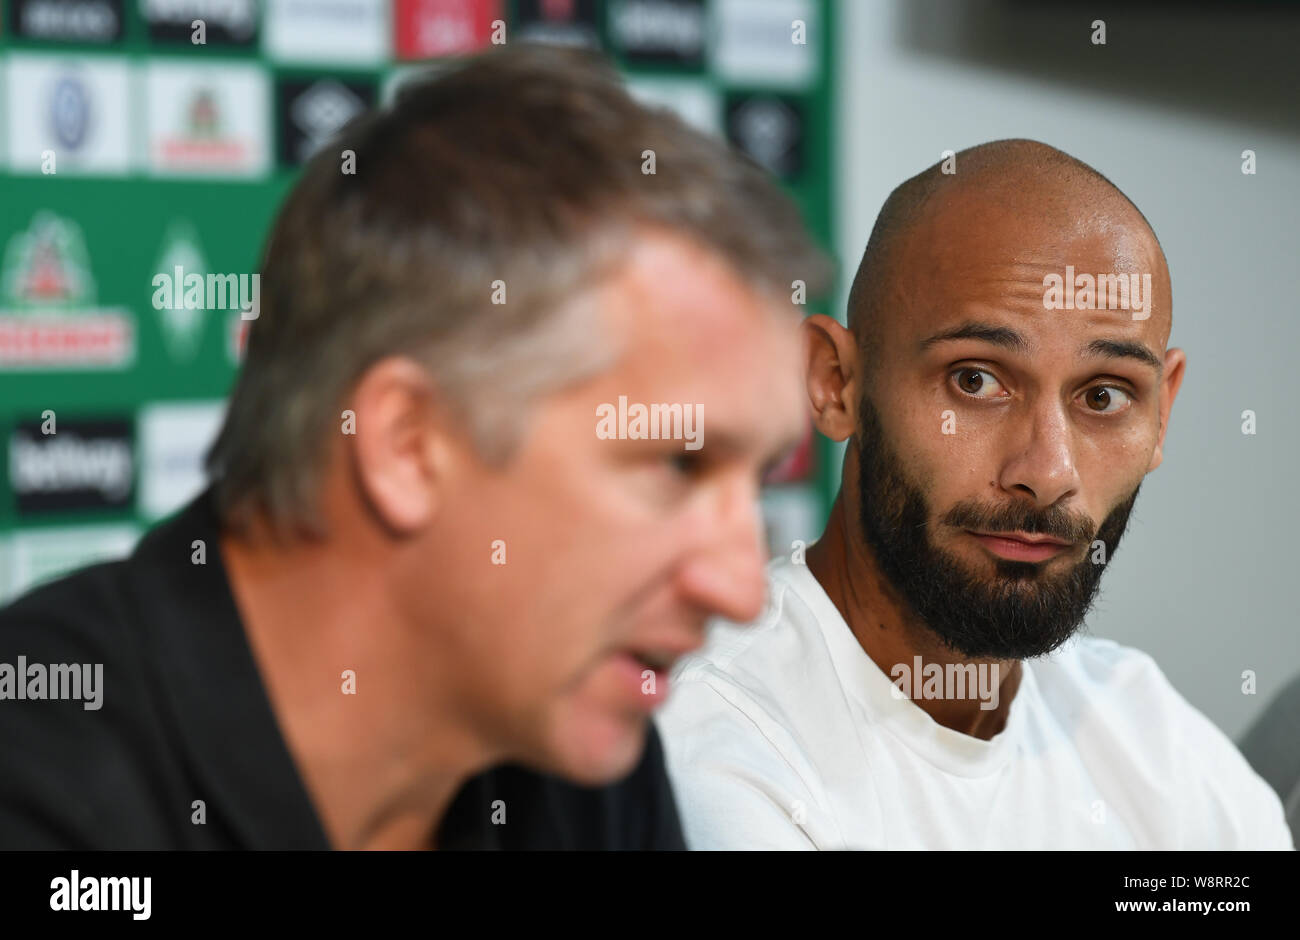 Bremen, Germany. 11th Aug, 2019. Frank Baumann (l), Managing Director Sport of Werder Bremen, sits next to Ömer Toprak at a press conference. Toprak comes on loan with purchase option from Borussia Dortmund. Credit: Carmen Jaspersen/dpa - IMPORTANT NOTE: In accordance with the requirements of the DFL Deutsche Fußball Liga or the DFB Deutscher Fußball-Bund, it is prohibited to use or have used photographs taken in the stadium and/or the match in the form of sequence images and/or video-like photo sequences./dpa/Alamy Live News Stock Photo